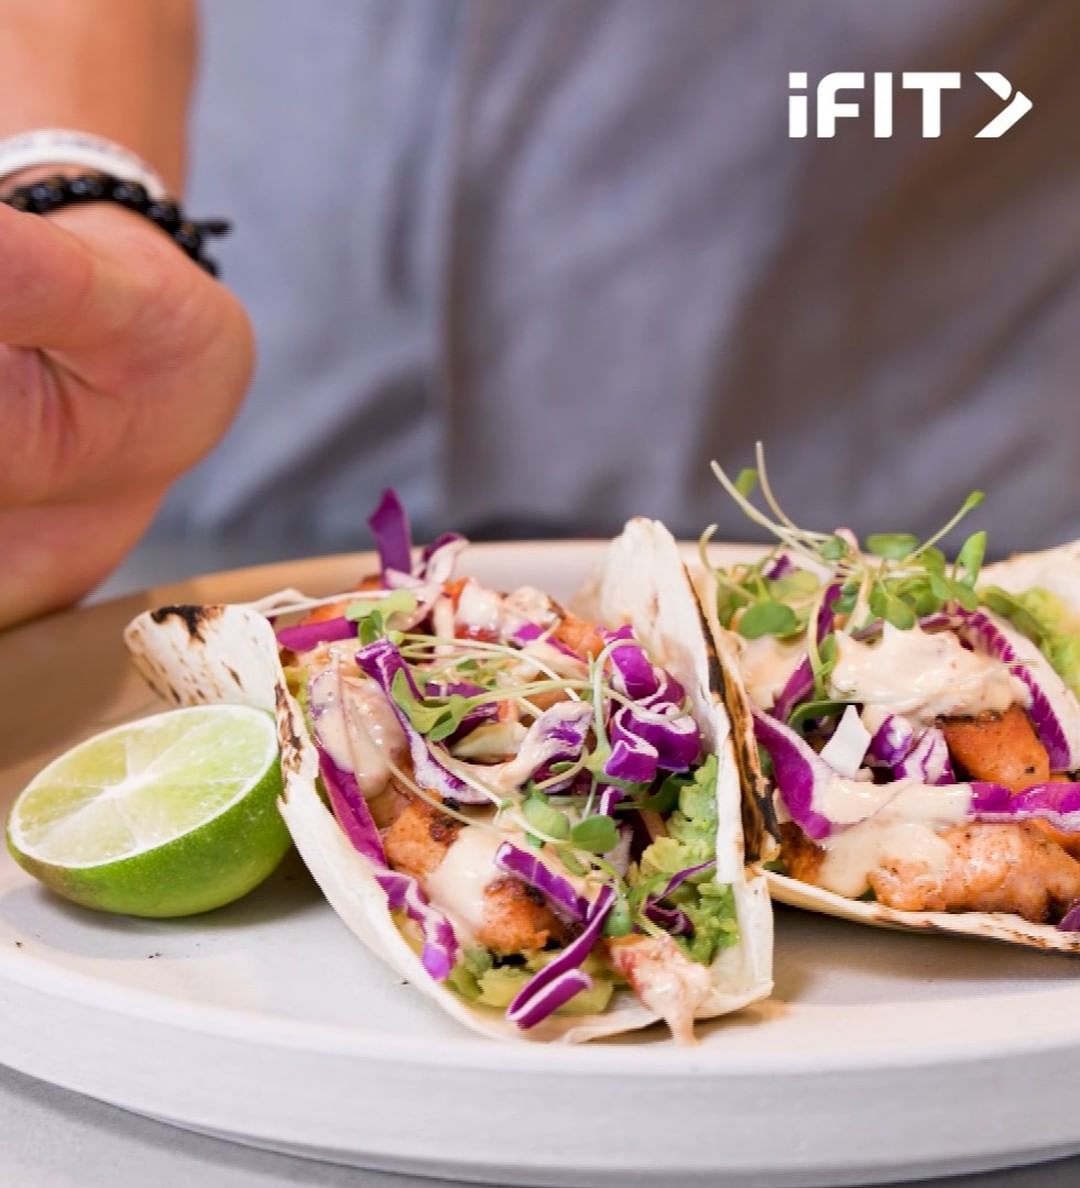 What's for dinner? @44bojan’s favorite Salmon Tacos  #JazzEats...